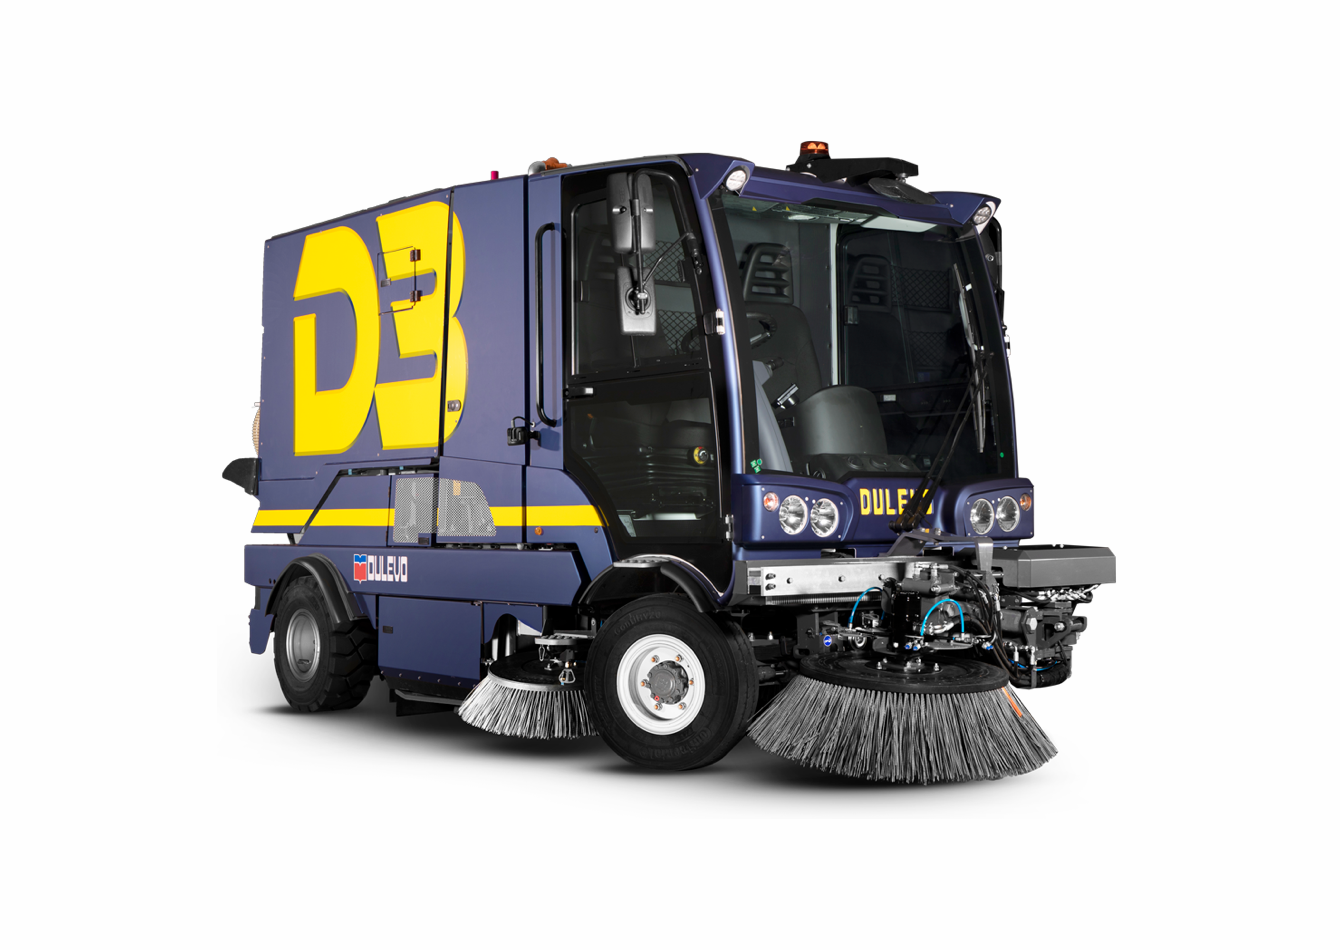 D3 Street Sweepers